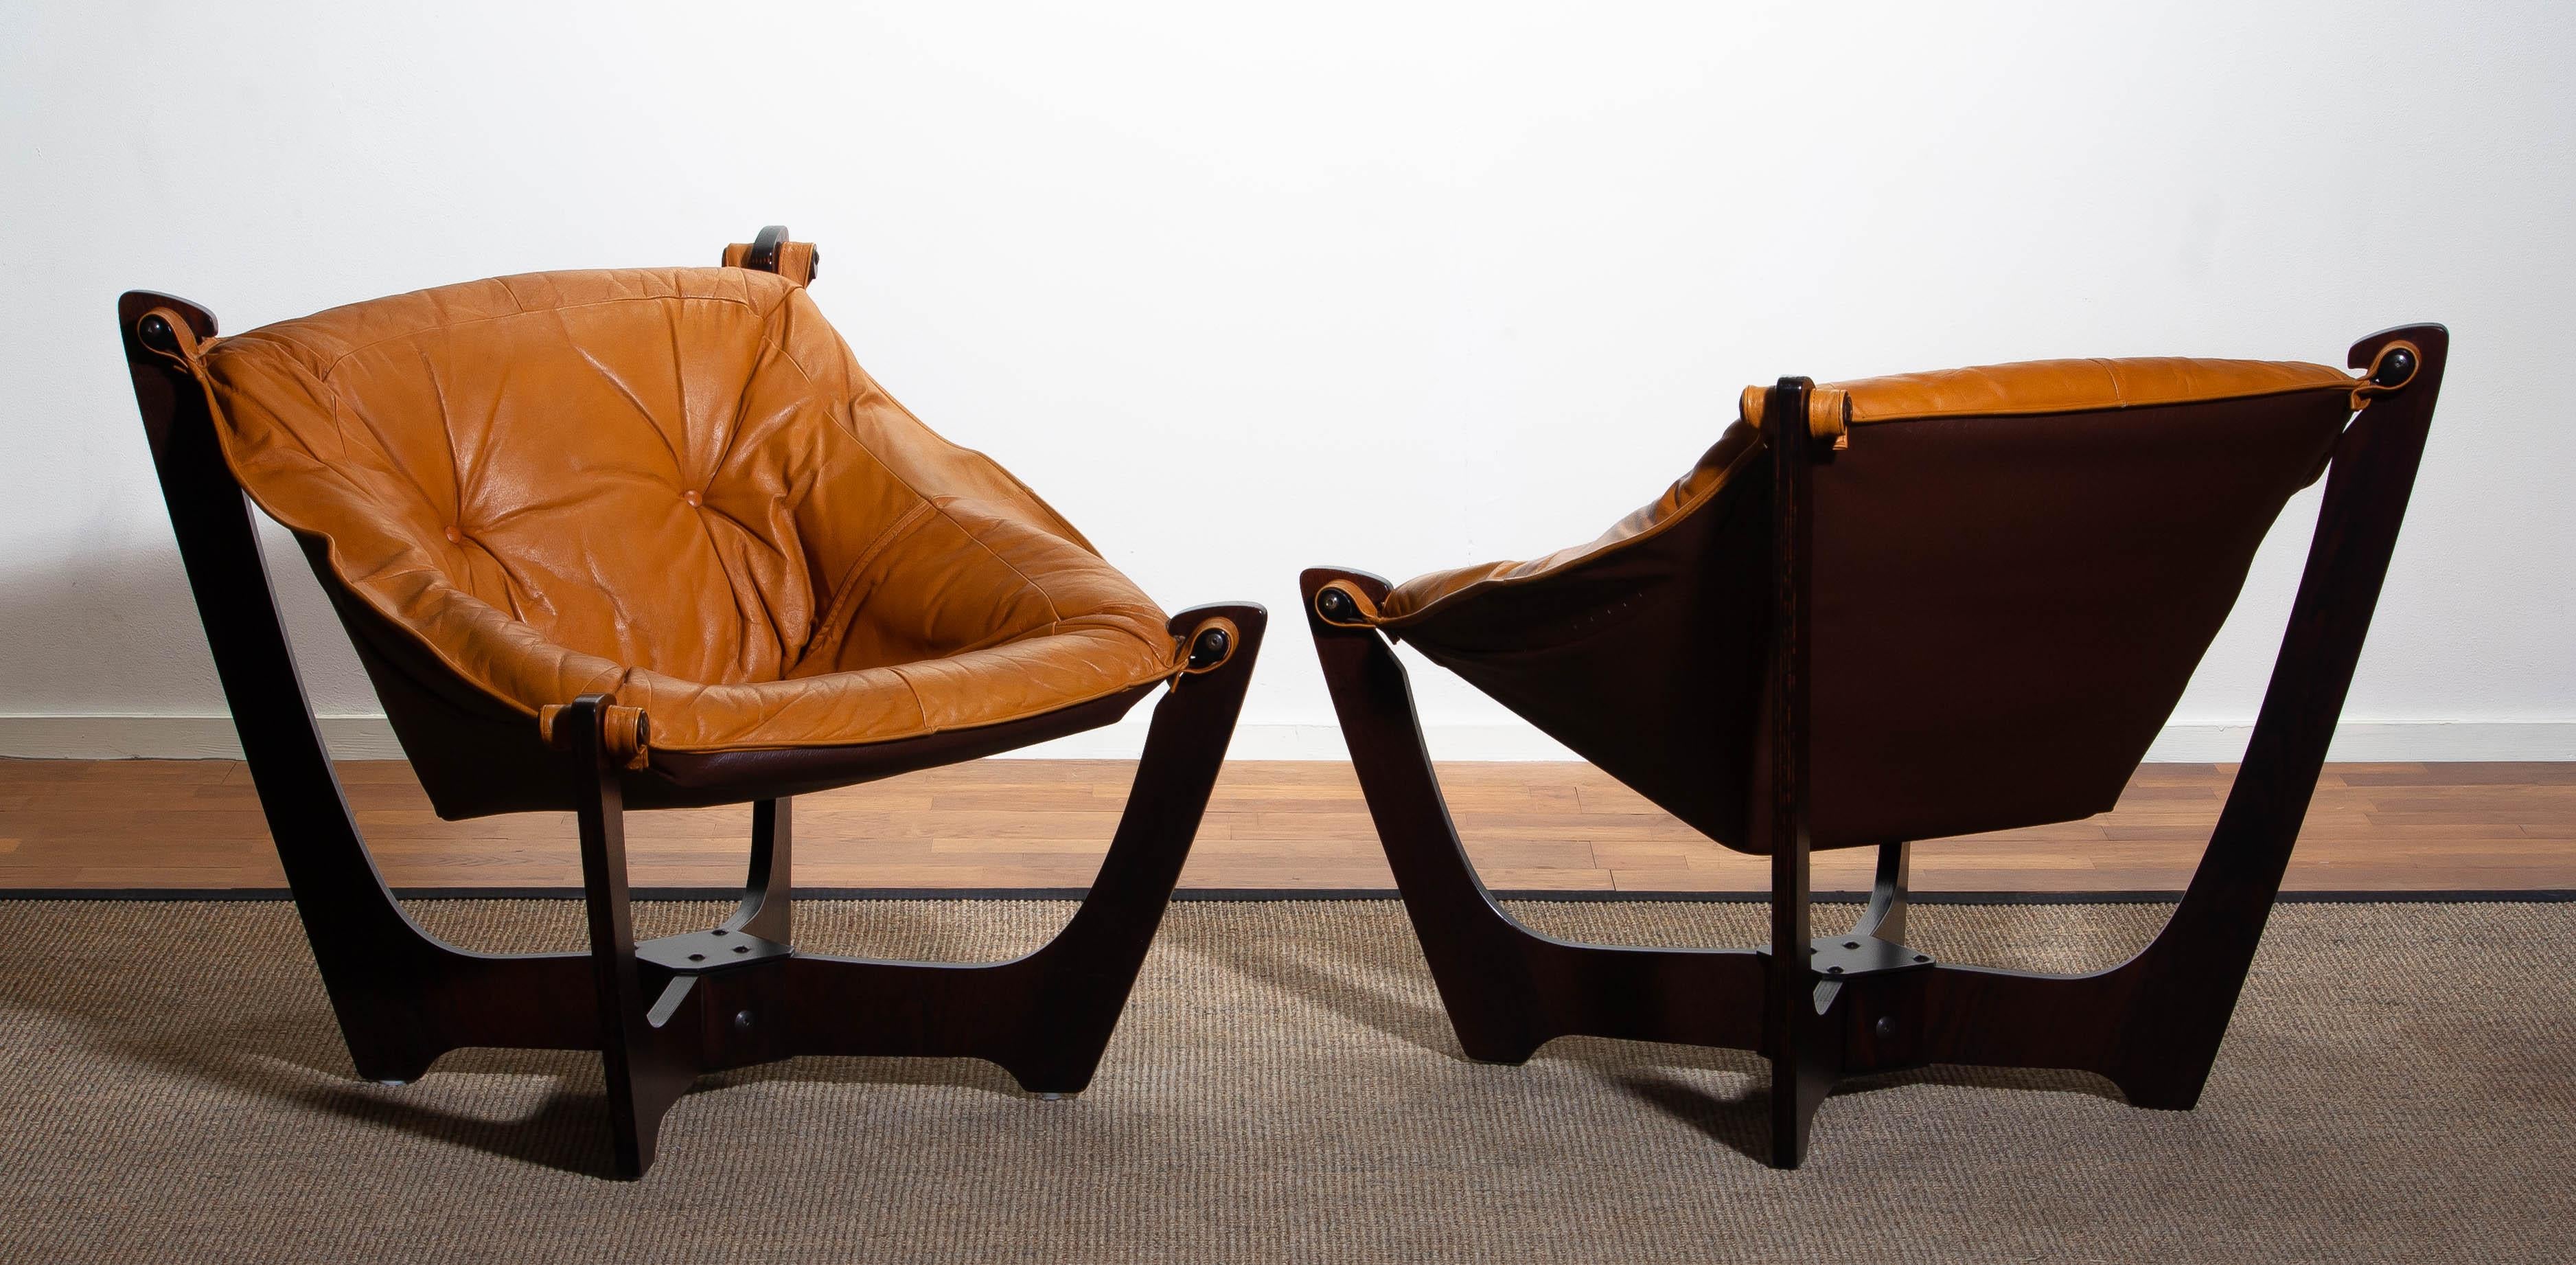 Late 20th Century 1970 Pair of Leather Lounge Chairs by Odd Knutsen for Hjellegjerde Møbler Norway